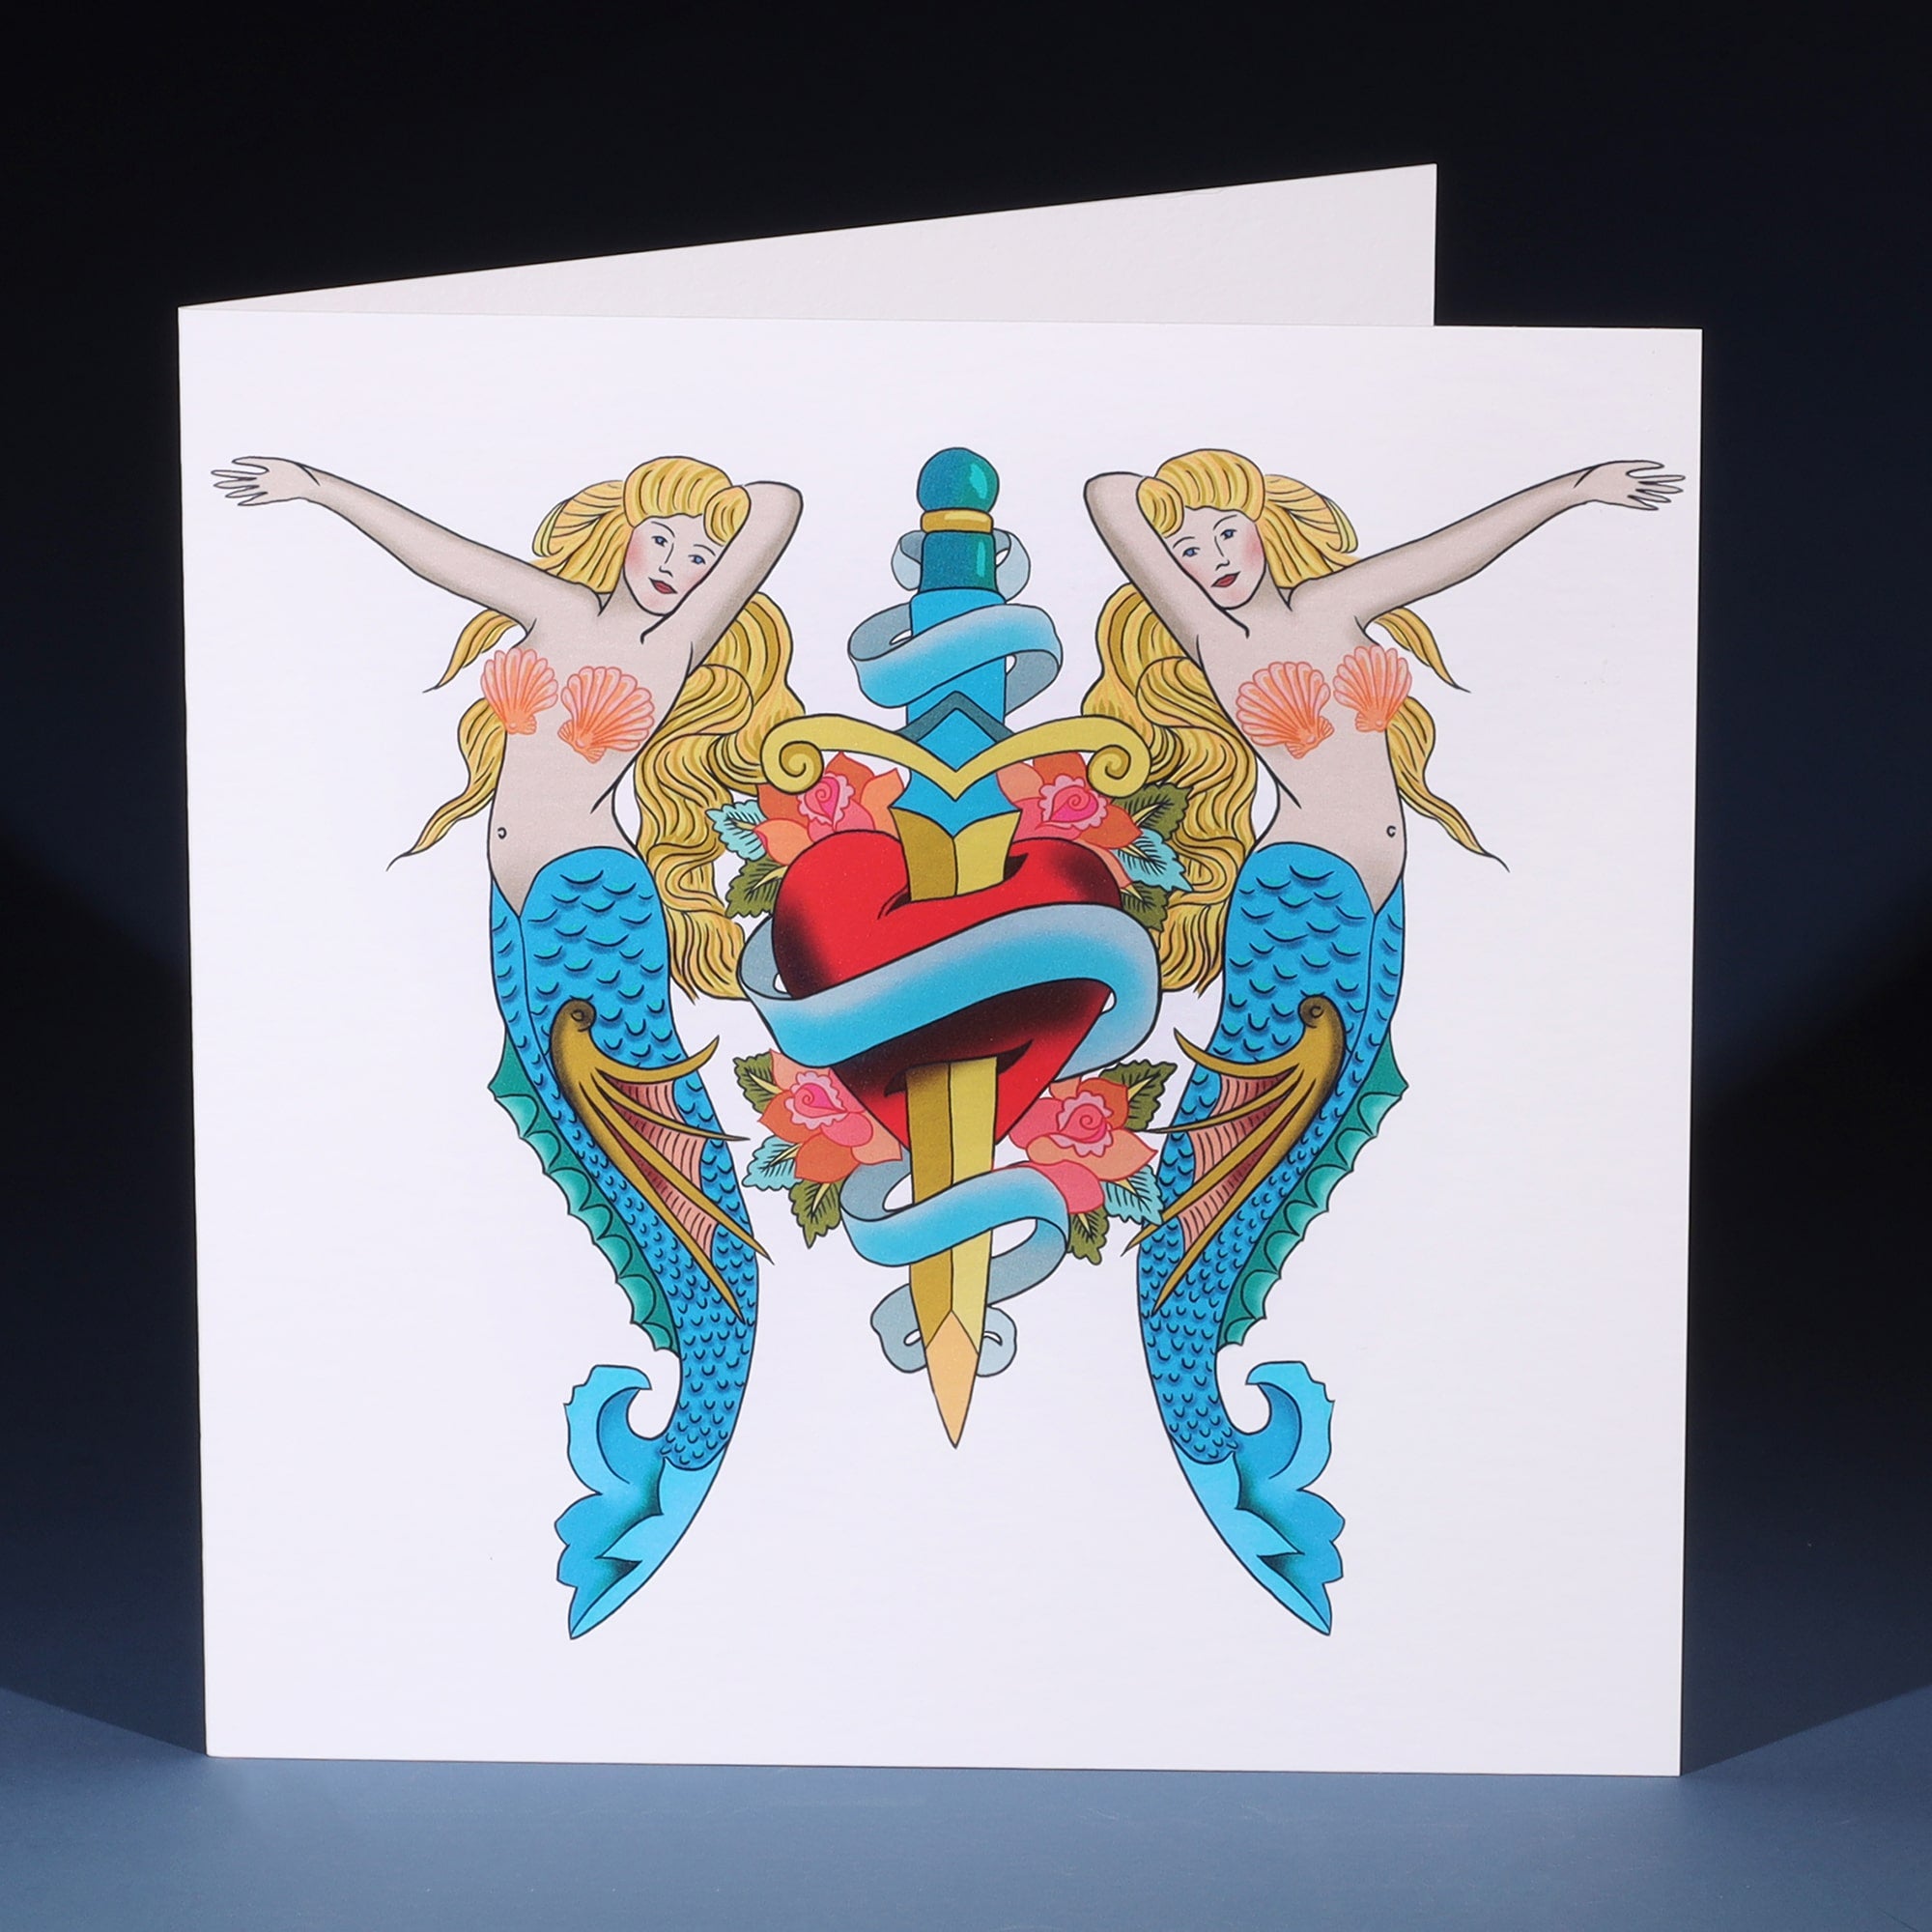 White greeting card with tattoo inspired illustration of mermaids & dagger going through a heart.